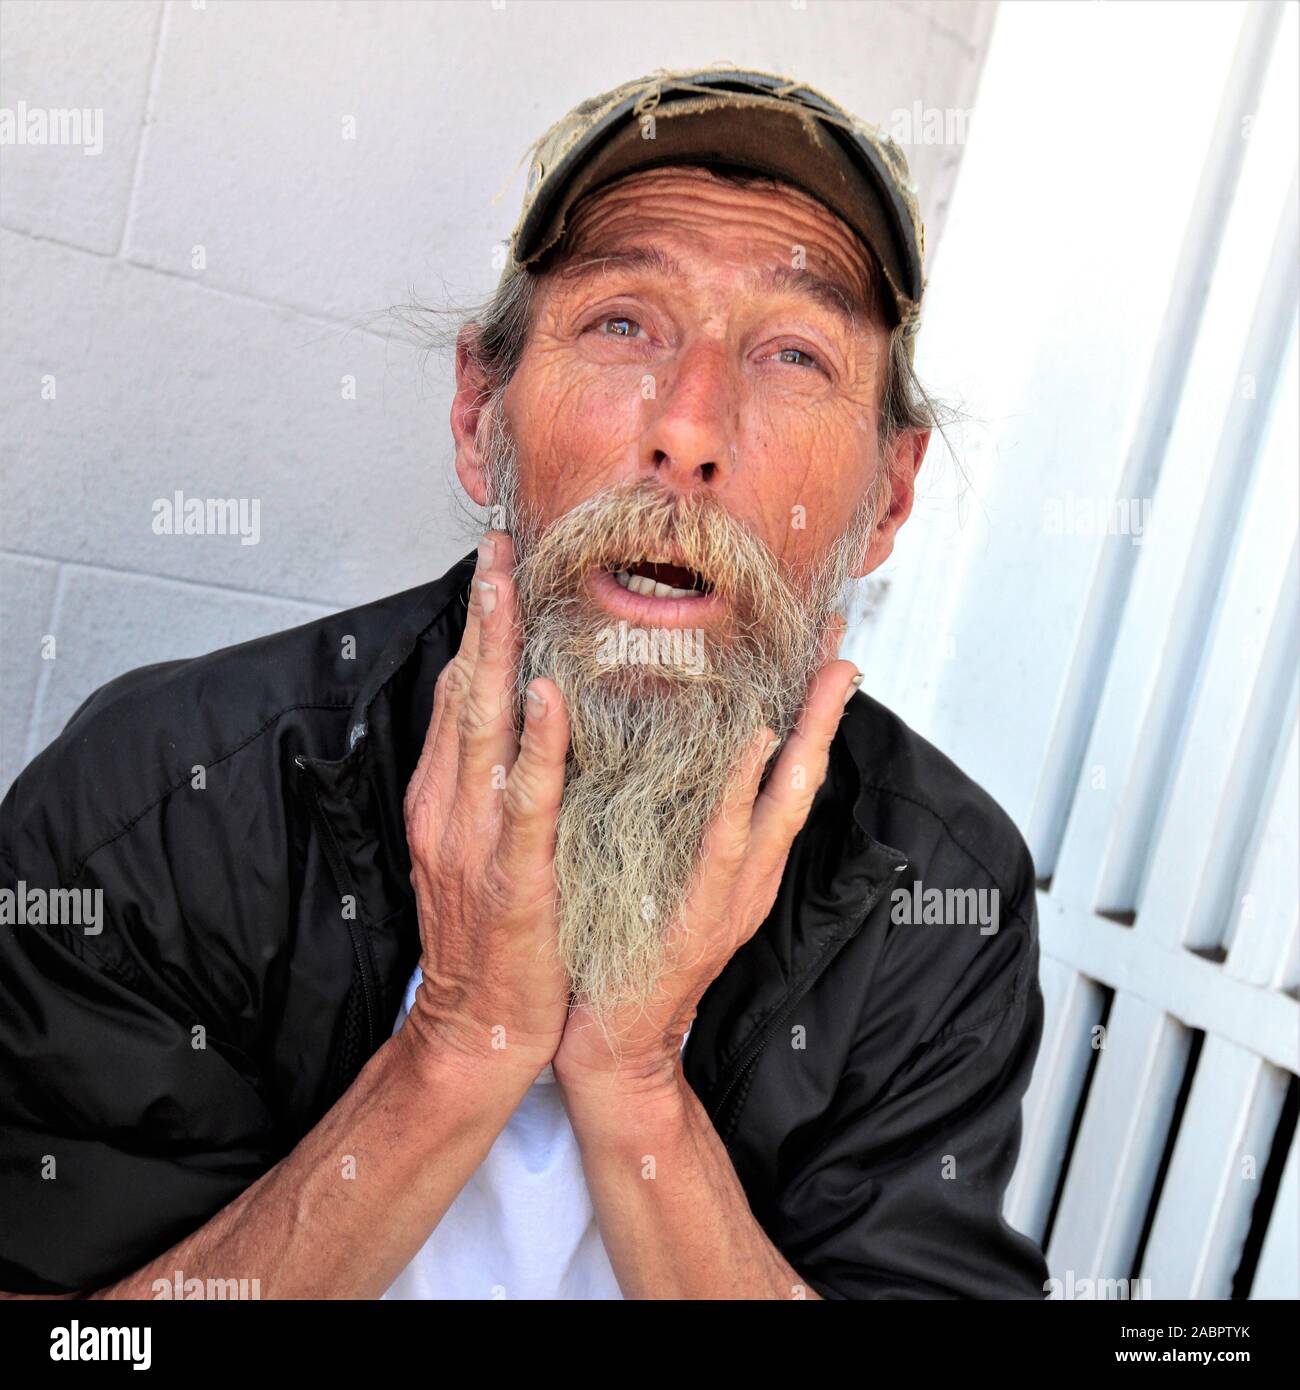 60 Year Old Man Beard High Resolution Stock Photography And Images Alamy